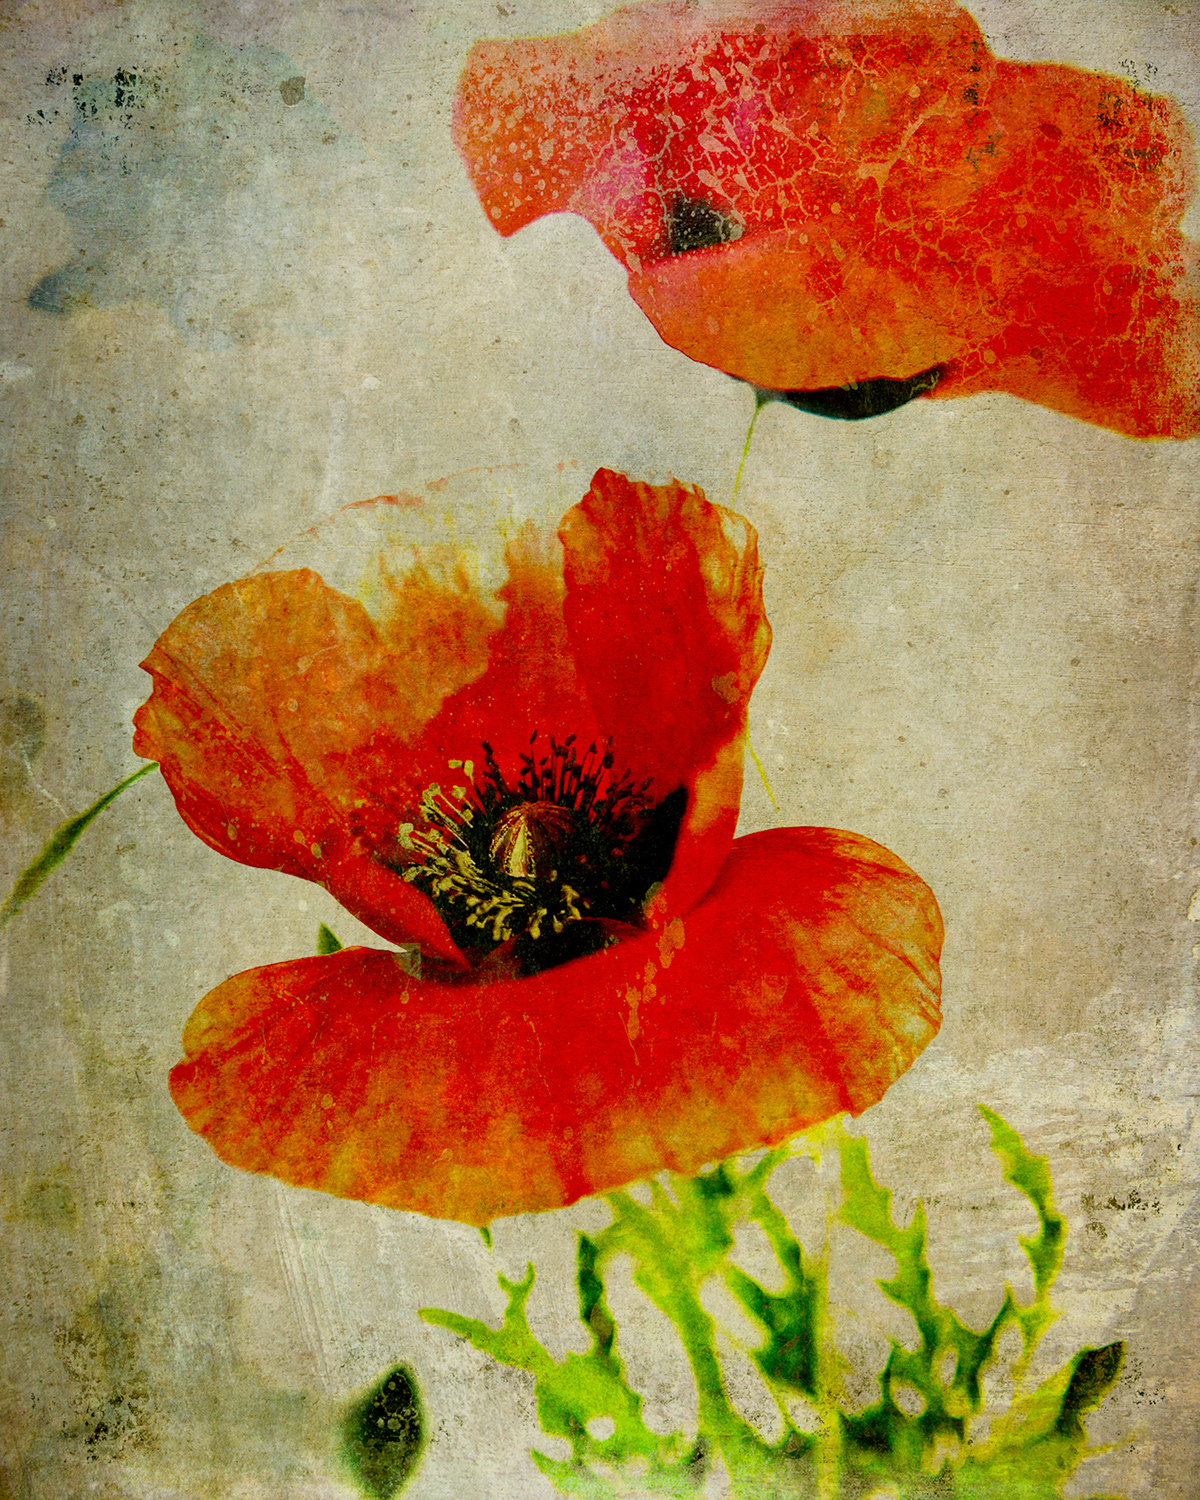 Flowers  Poppies textures red floral papaver still life